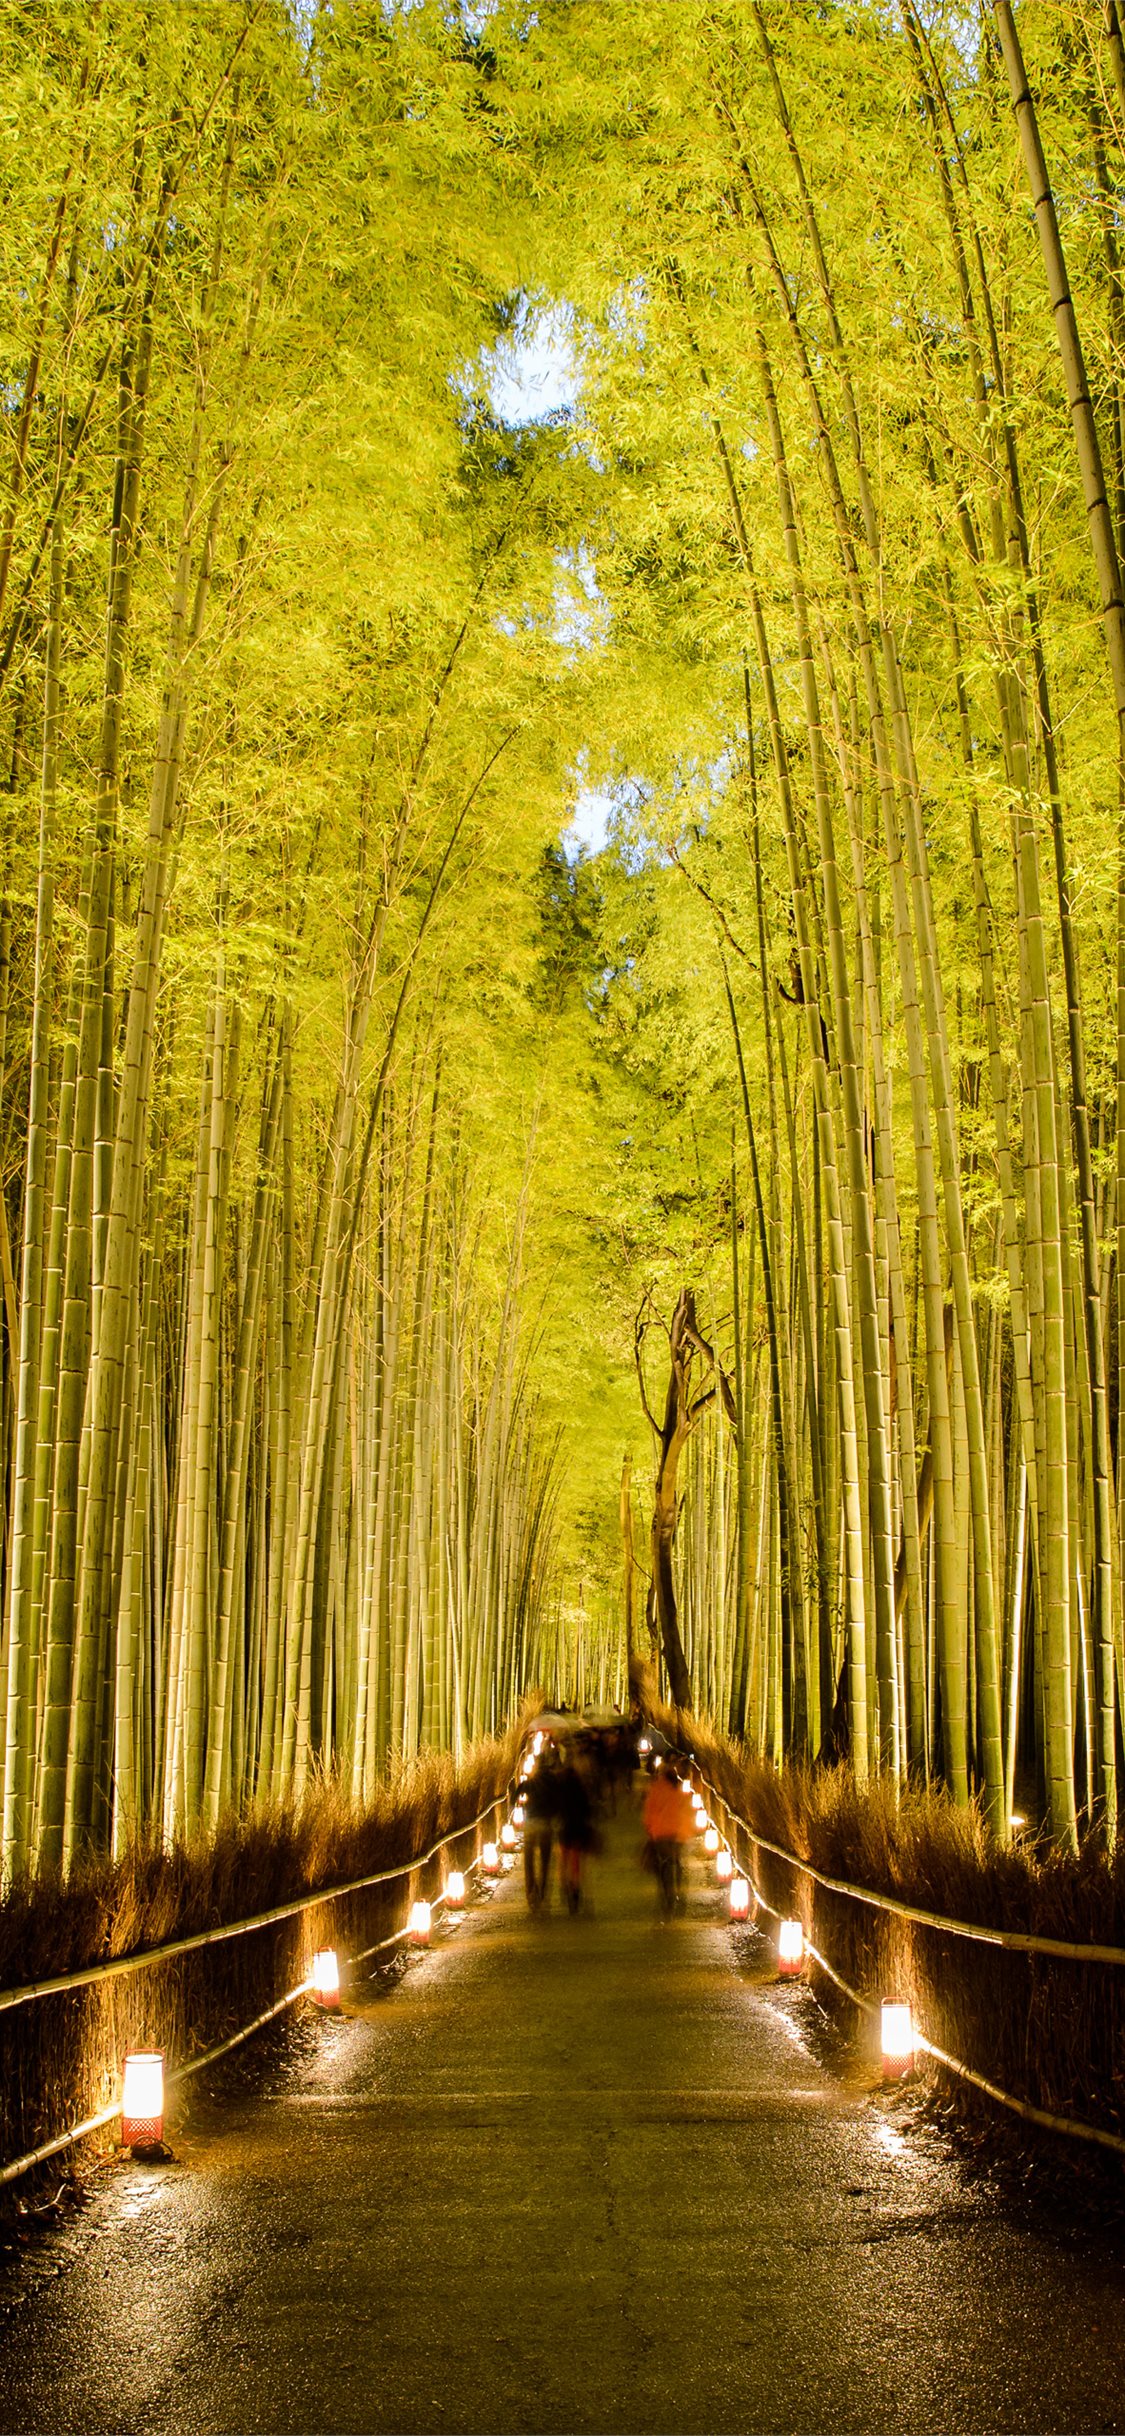 sagano-bamboo-forest-iphone-wallpapers-free-download